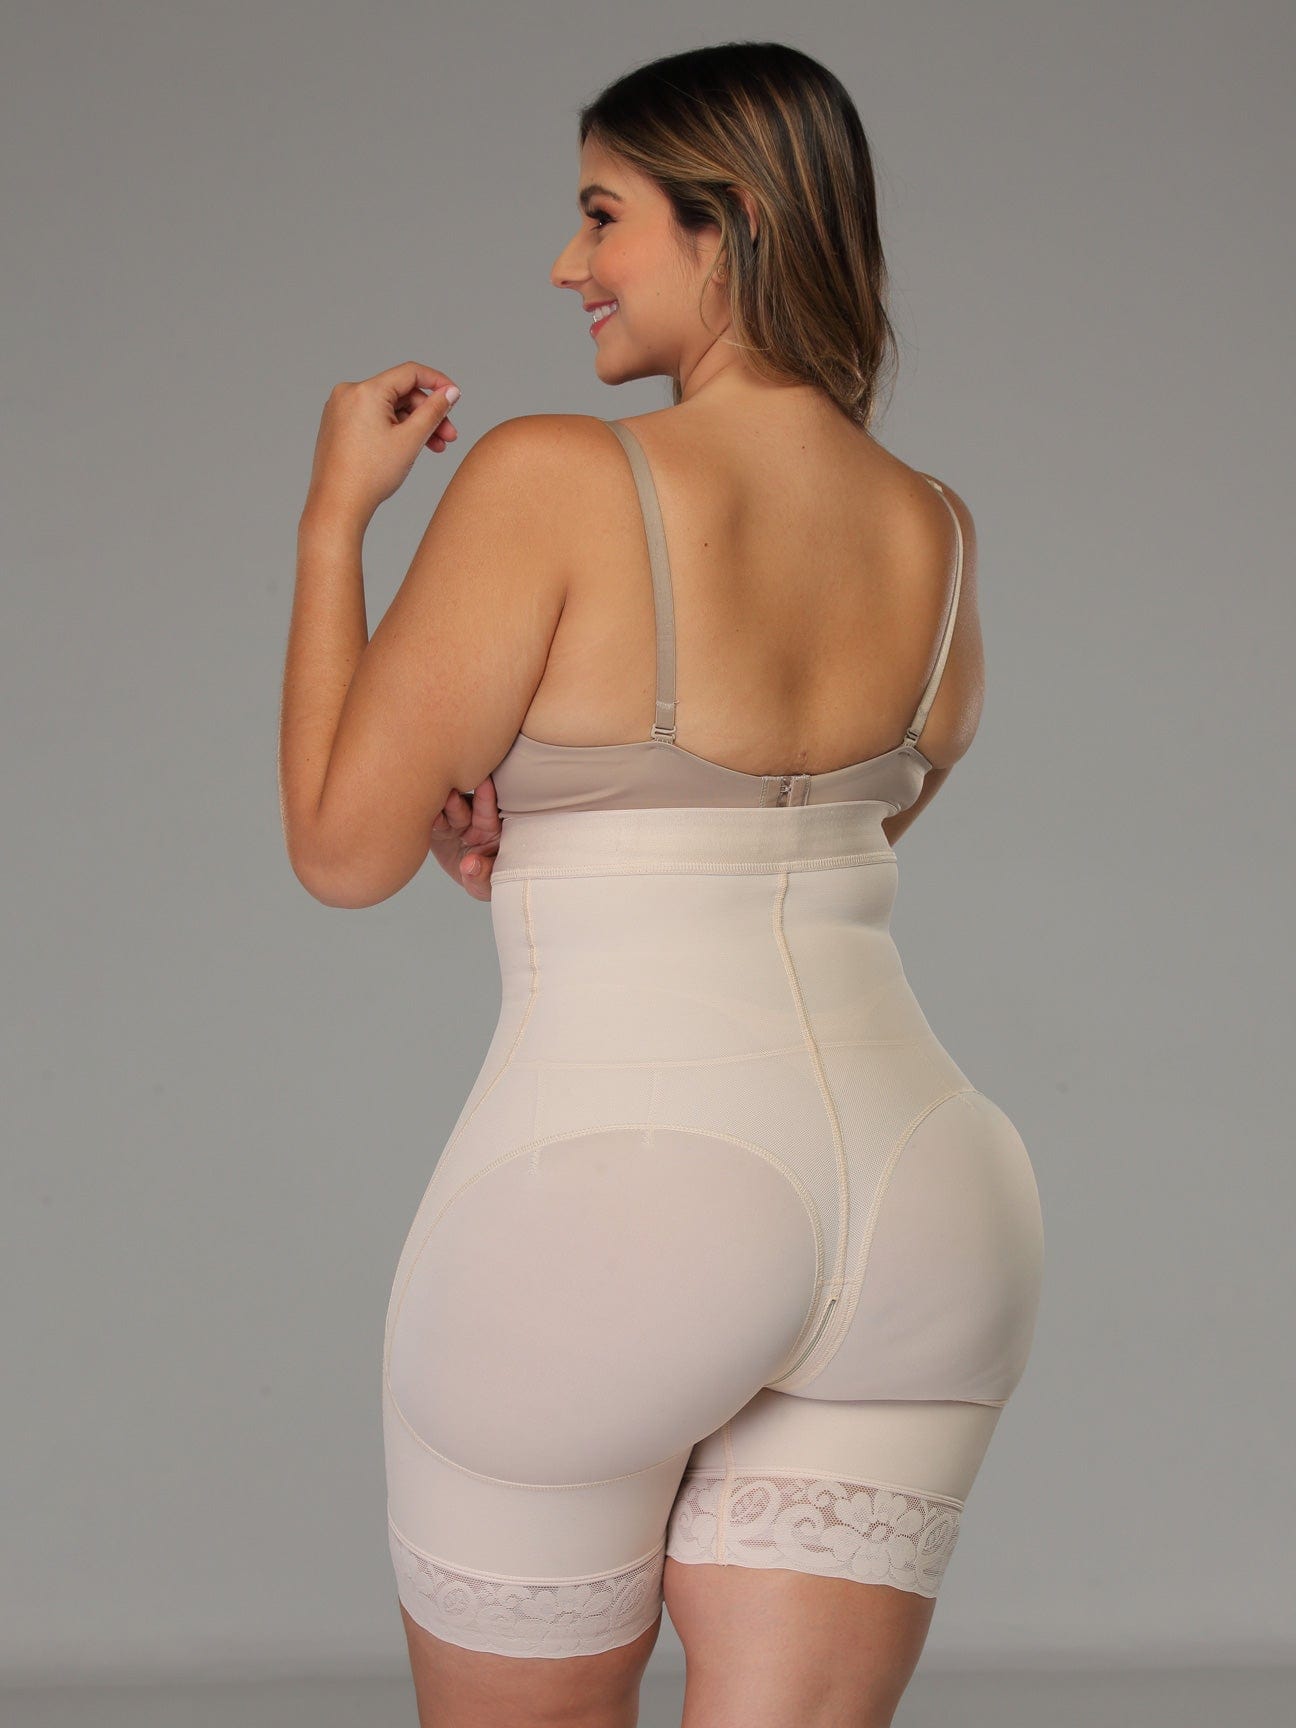 Confidence by Fajas Lipo Express - ¡Pregúntenos sobre nuestra faja más  popular! Ask us about our most popular shapewear design! ☎️ (915) 545-3554  ☎️ #LipoExpress #Shapewear #ShapersFaja #Fajas #Shapers #Girdle #Beauty  #Health #Fitness #WeightLoss